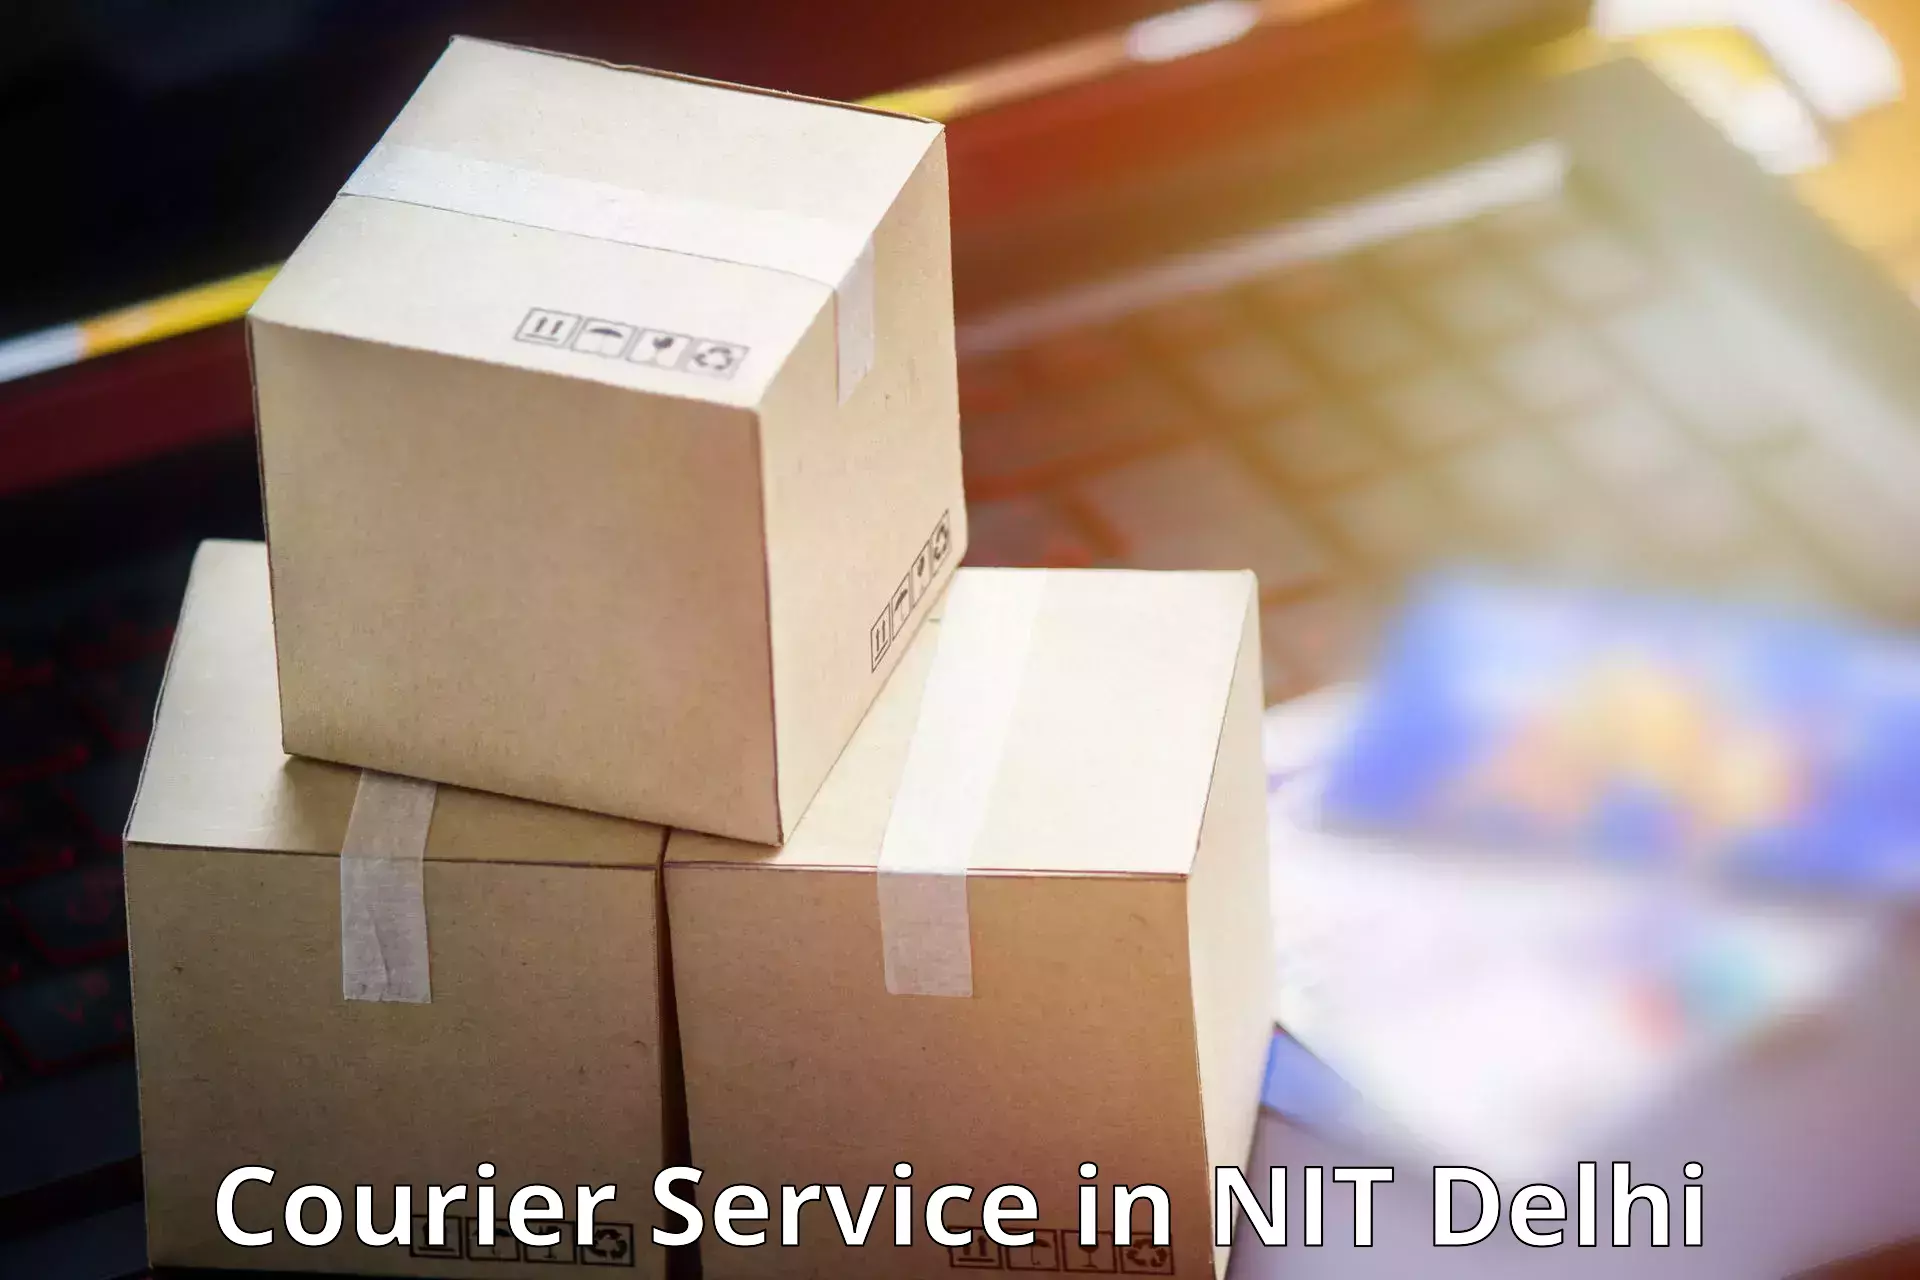 Integrated shipping systems in NIT Delhi